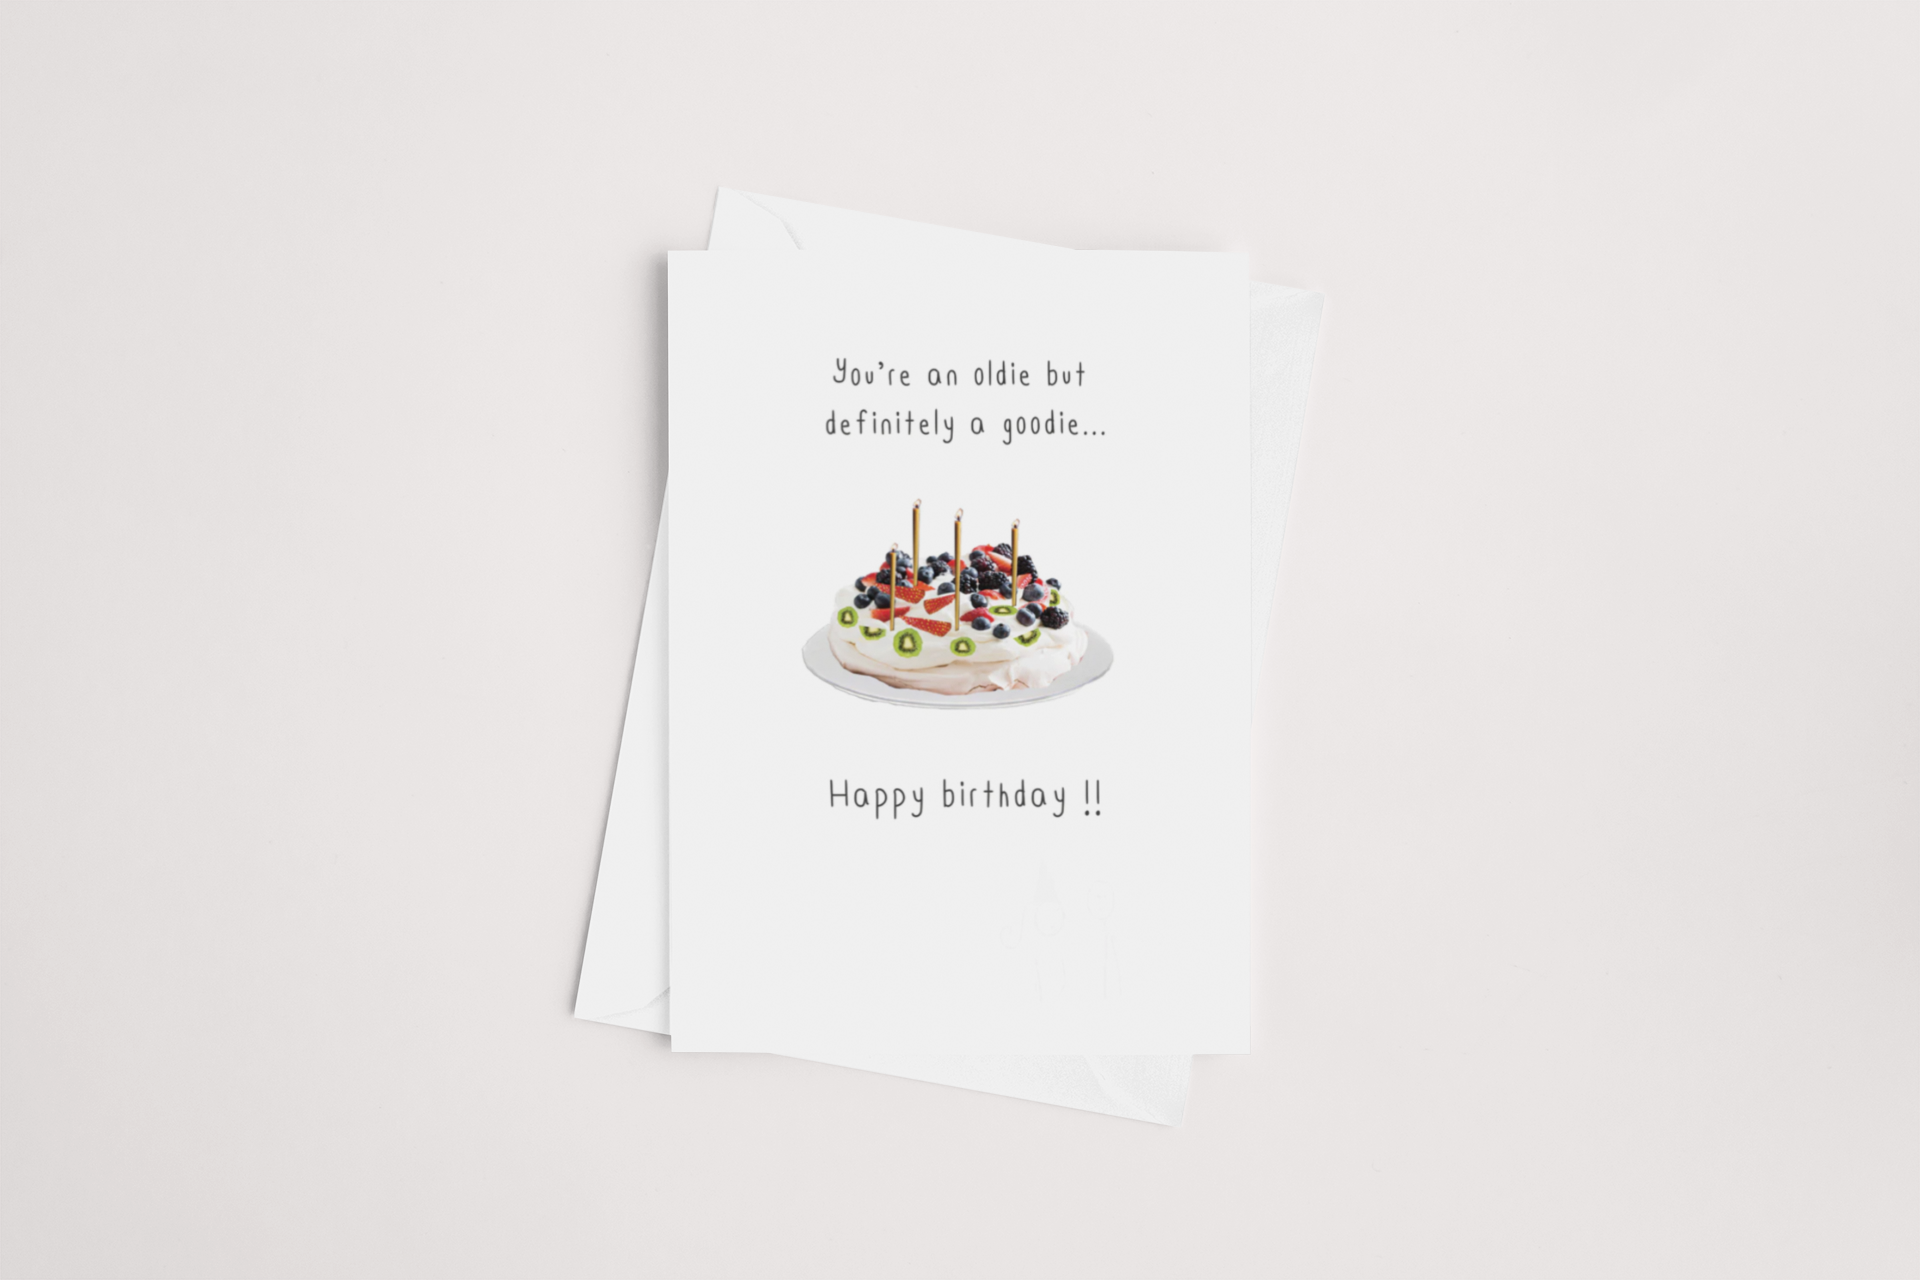 A birthday greeting card from icandy New Zealand featuring a playful message and an illustration of a cake with candles on a white background, available for multibuy.